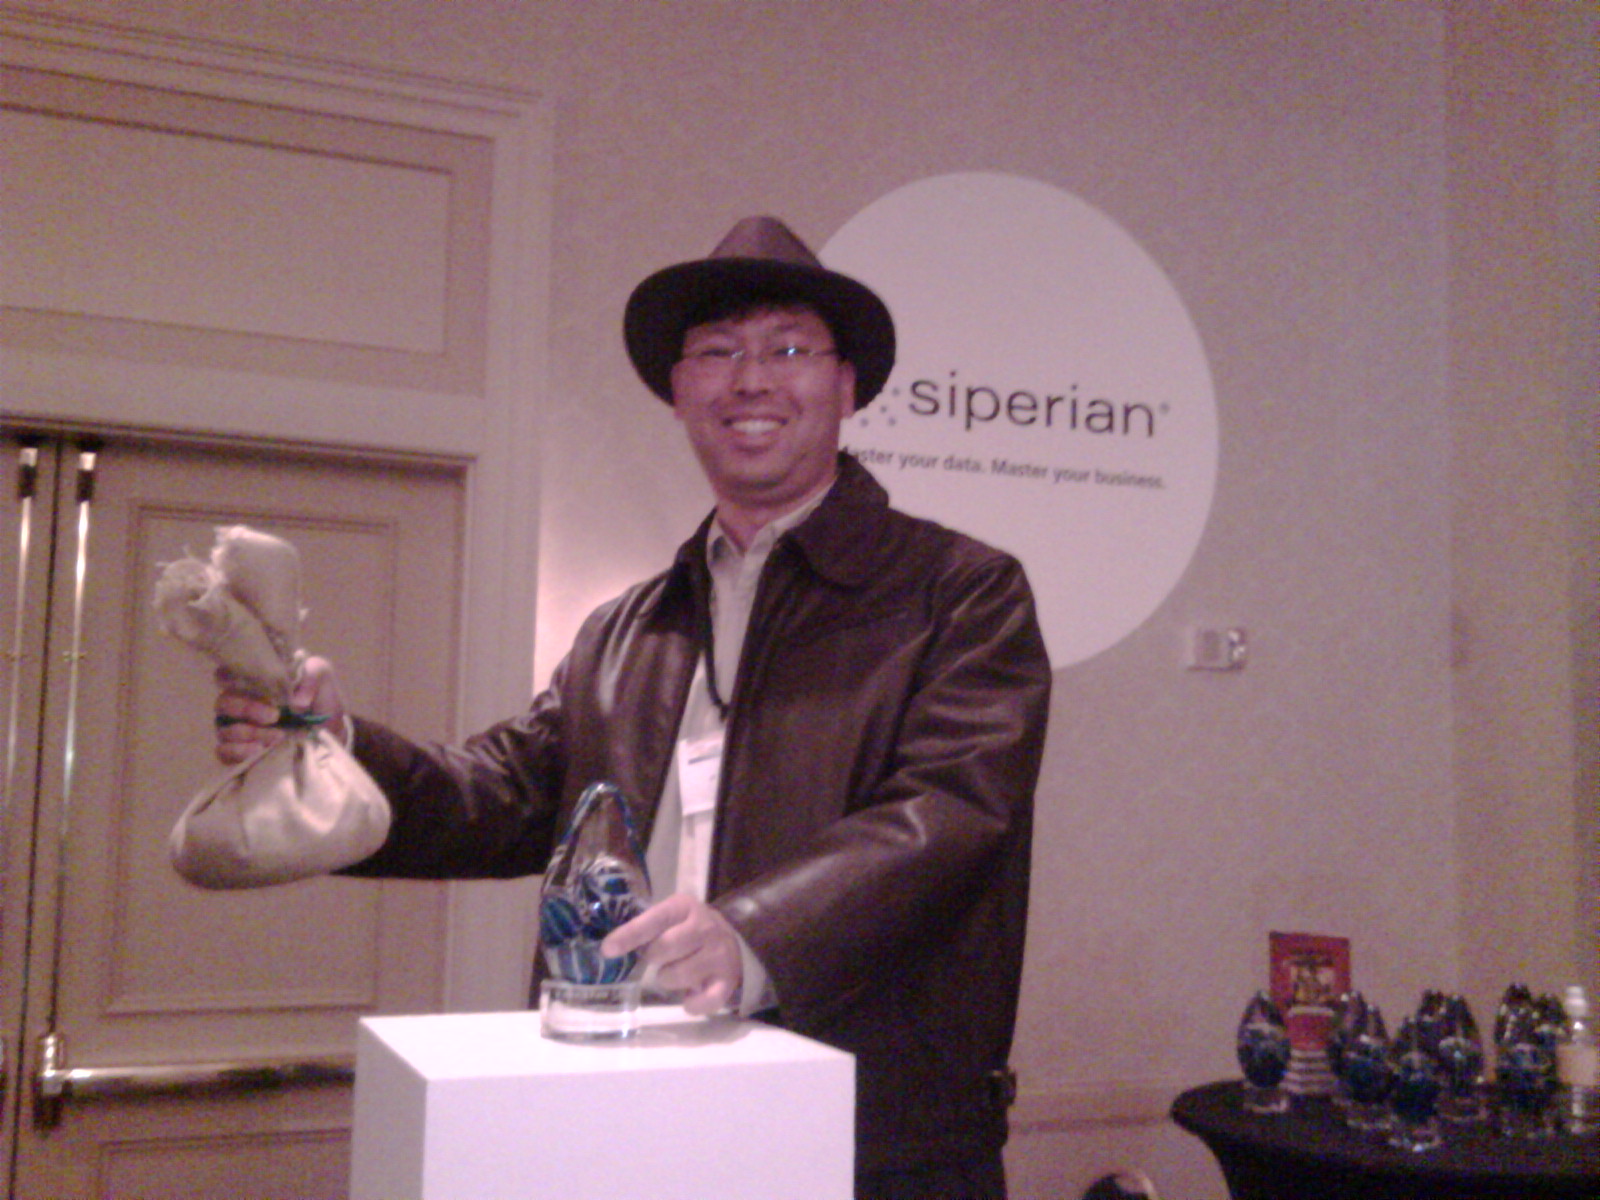 Ramon Chen doling out the 2008 Siperian Masters Awards